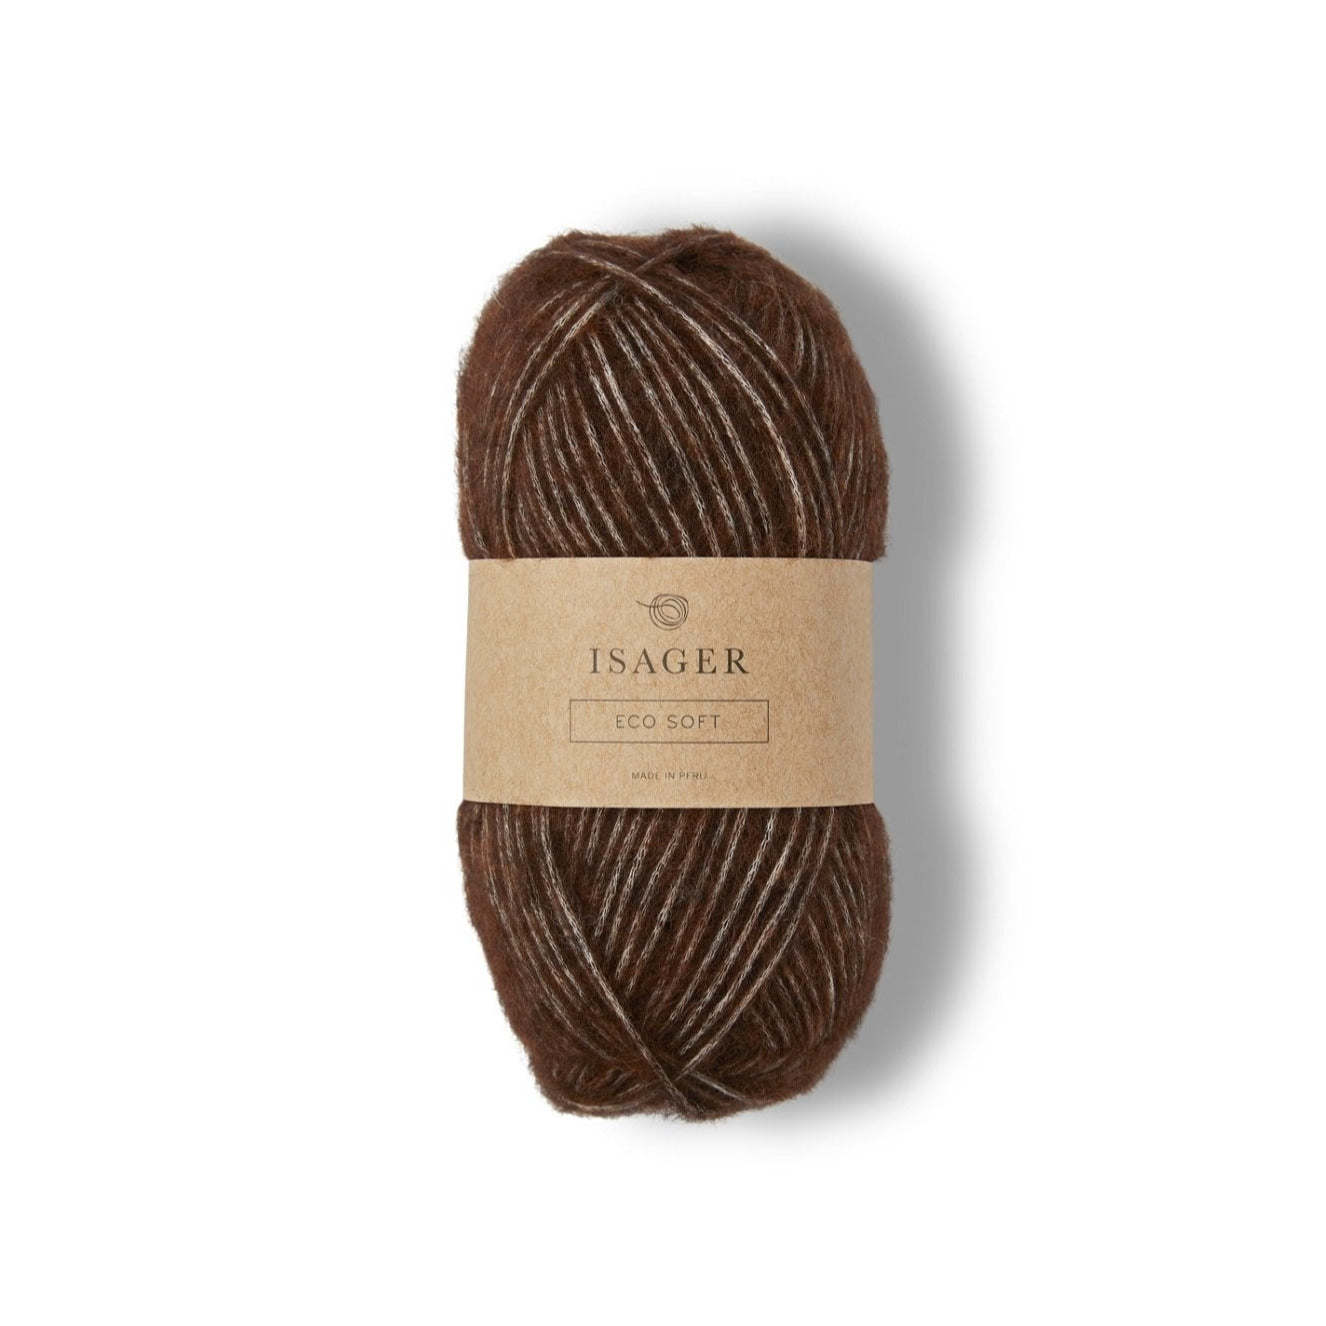 Isager Eco Soft - E4s - 8 Ply - Alpaca - The Little Yarn Store